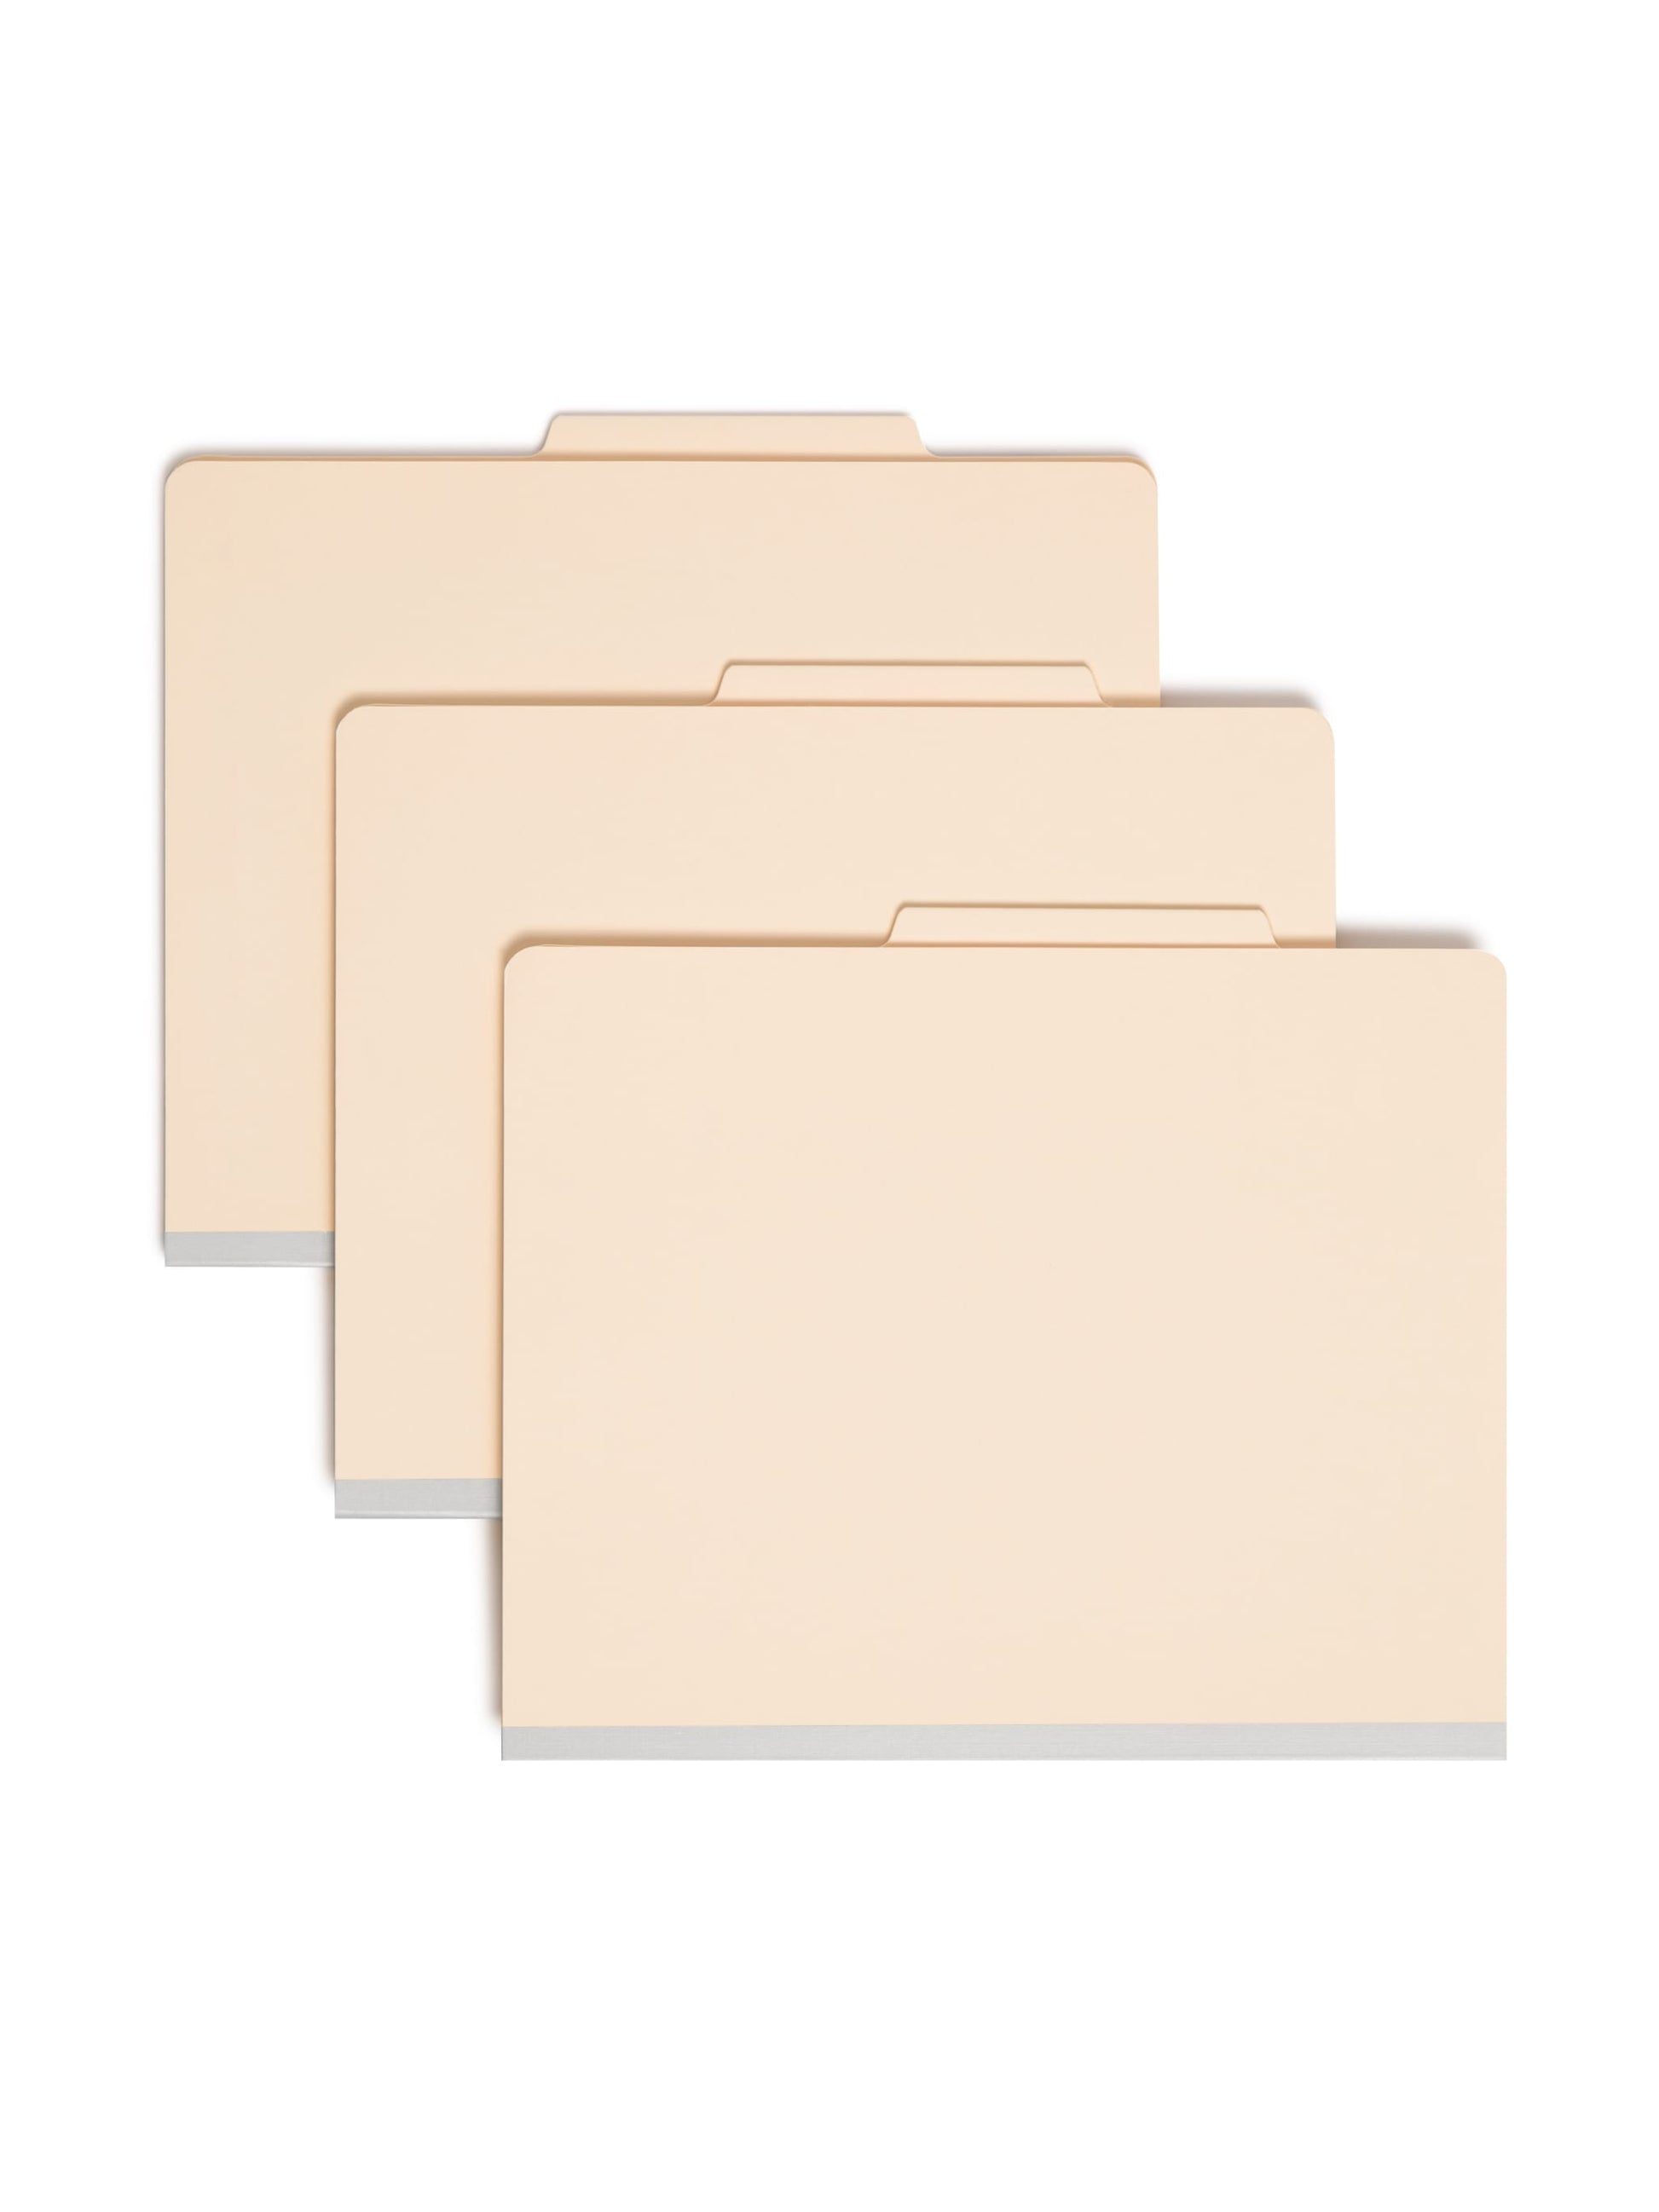 Classification File Folders, 2 Dividers, 2 inch Expansion, Manila Color, Letter Size, Set of 0, 30086486140004